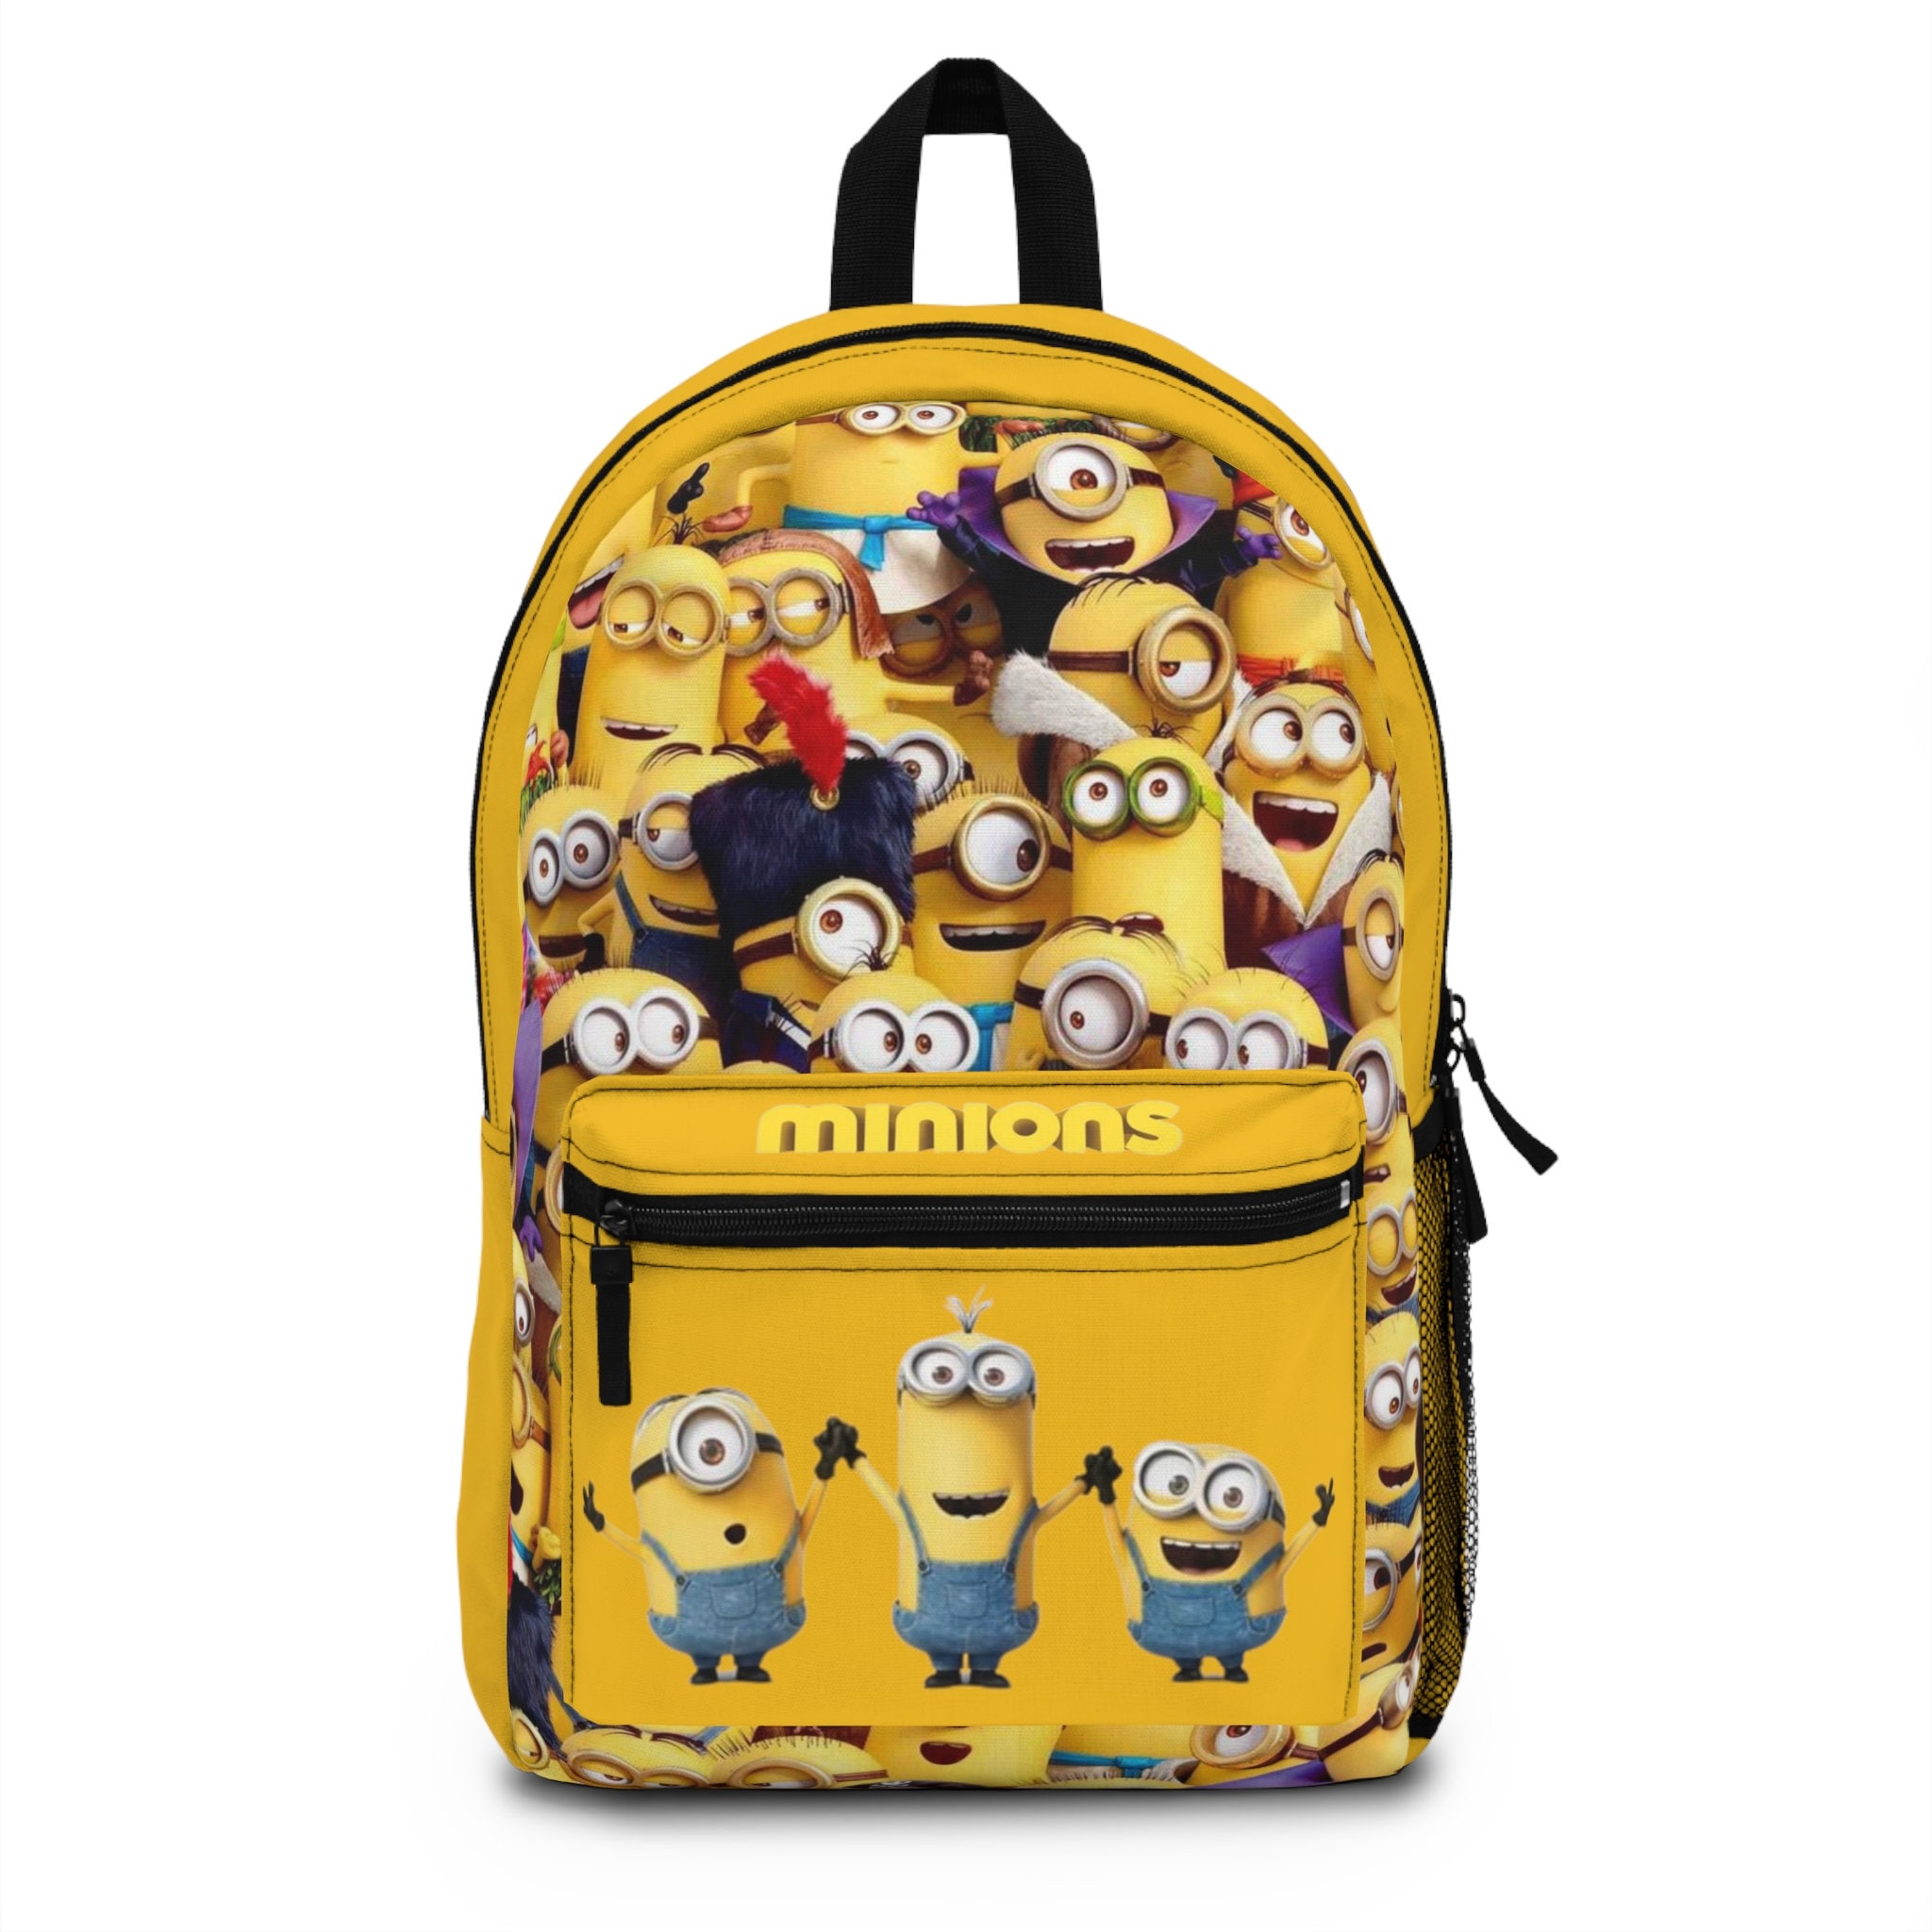 2019 Despicable Me Minion Cute Canvas Cartoon Adult Backpack School Bag  Free Shipping